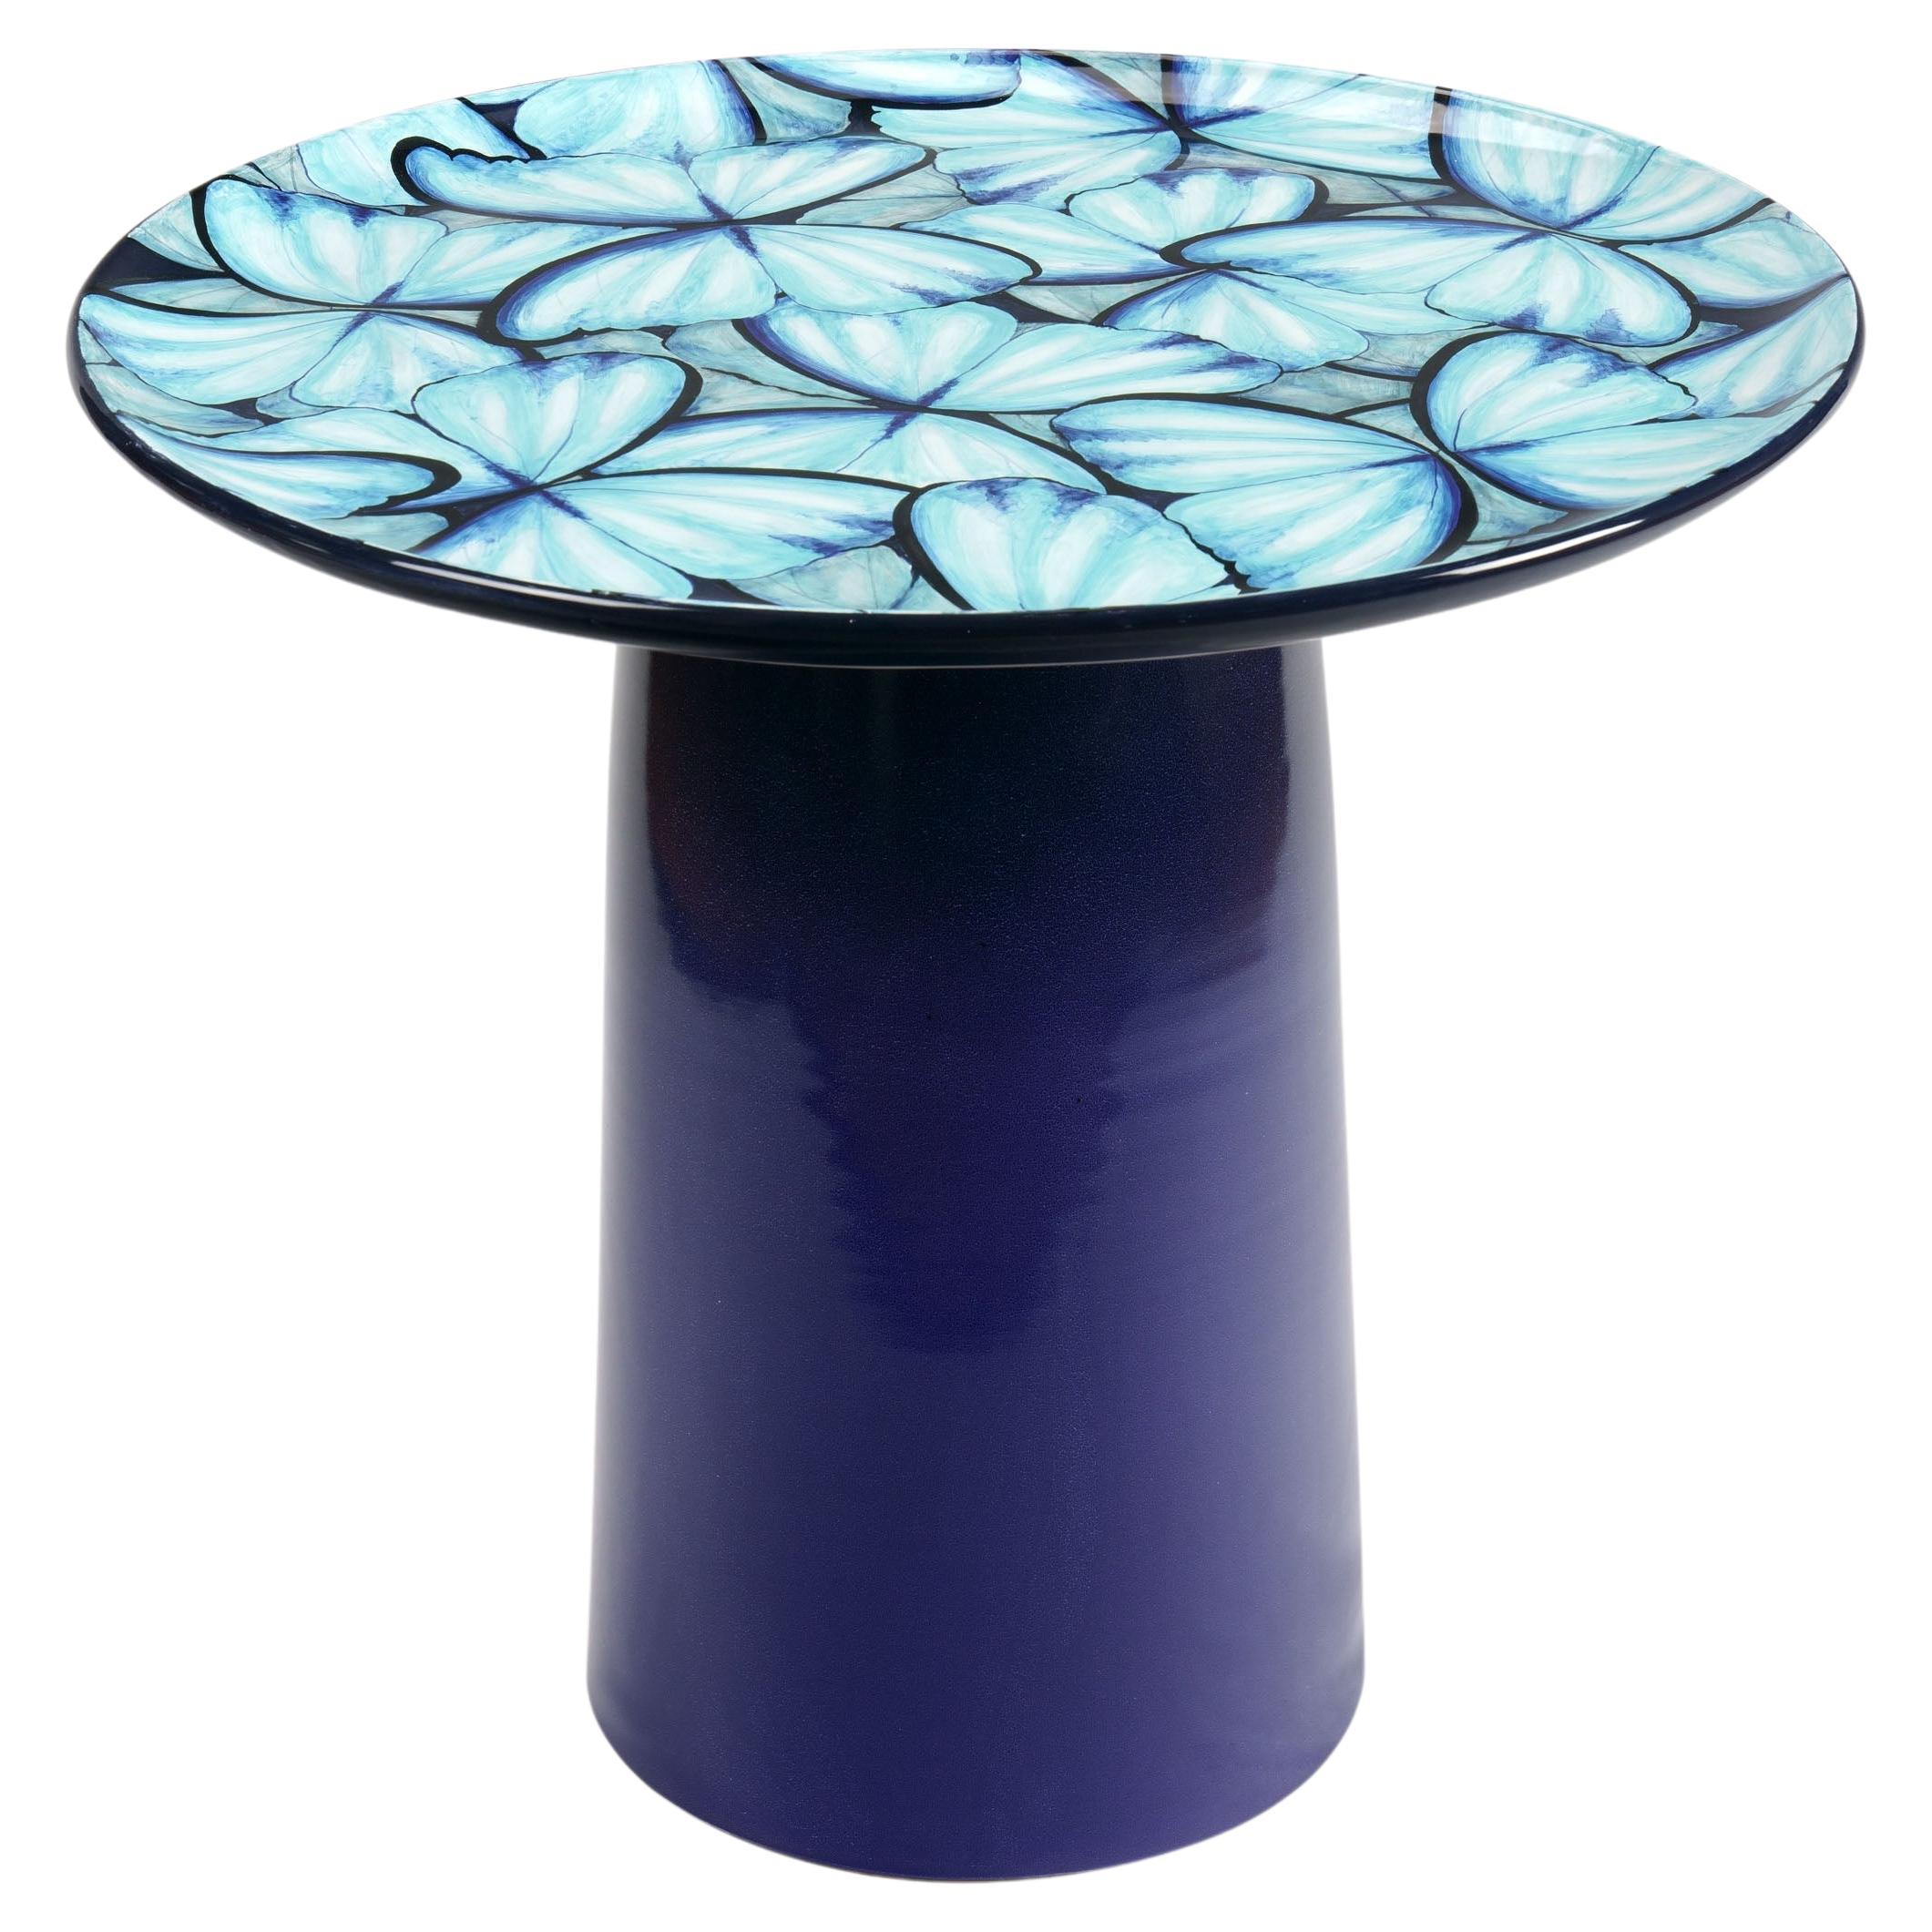 Ceramic Circle Side Table Light Blue Color Butterflies Hand Painted Majolica